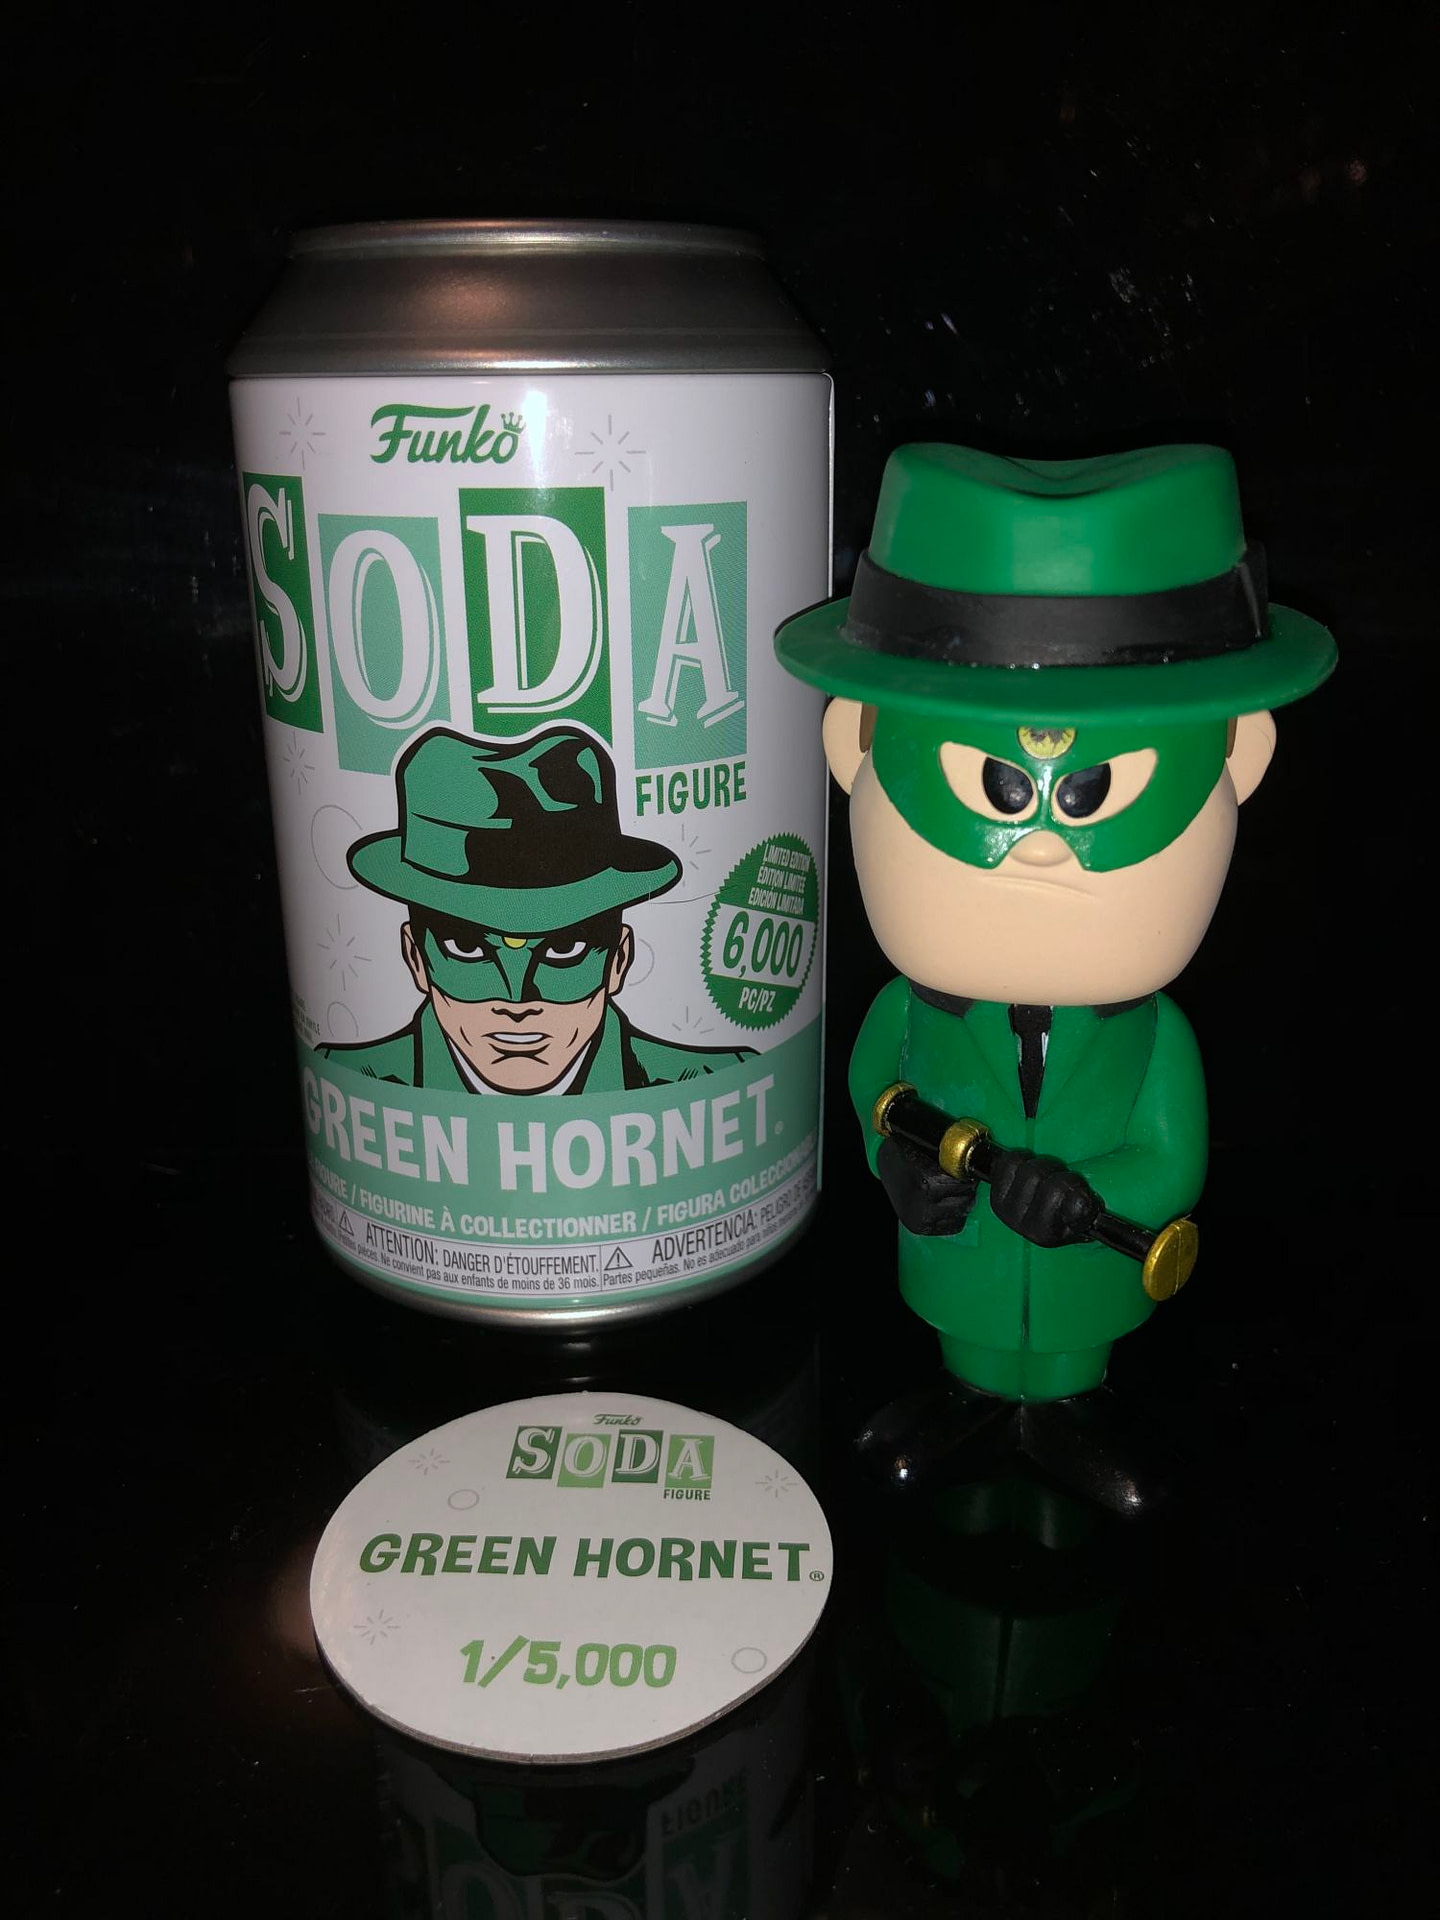 We Crack Open a Can of Some Refreshing Funko Soda [Review]